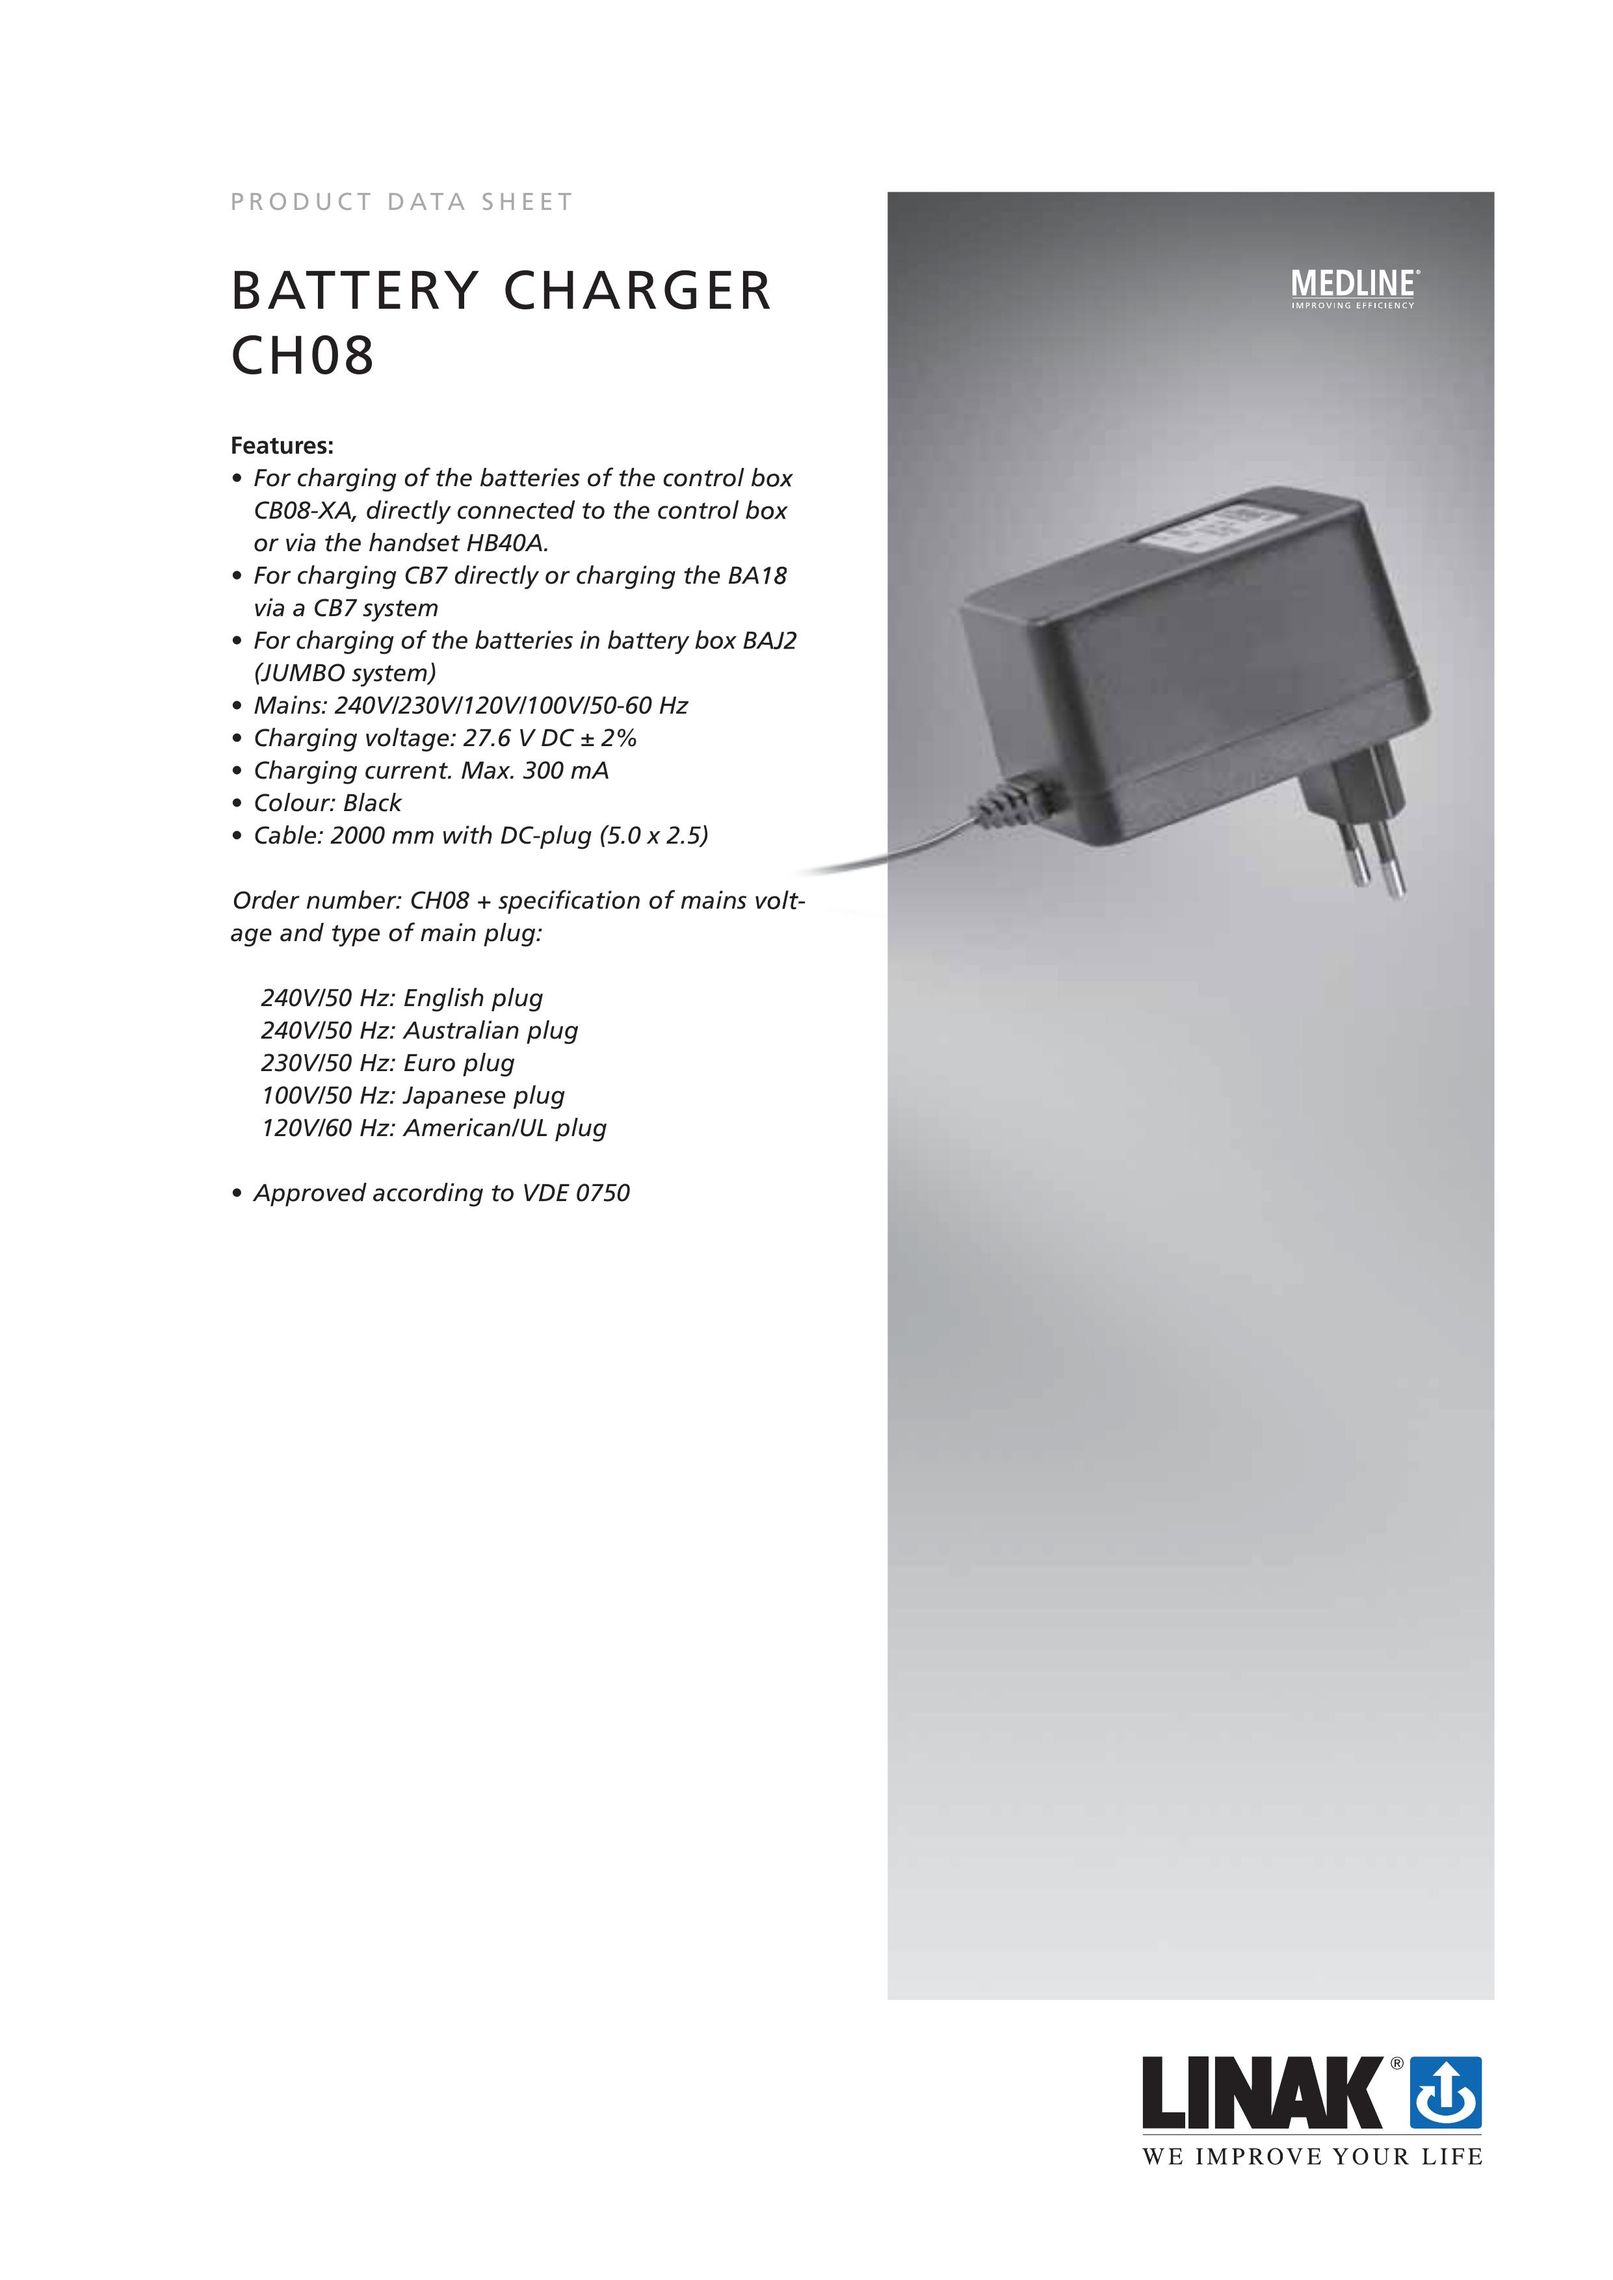 Linak CH08 Battery Charger User Manual